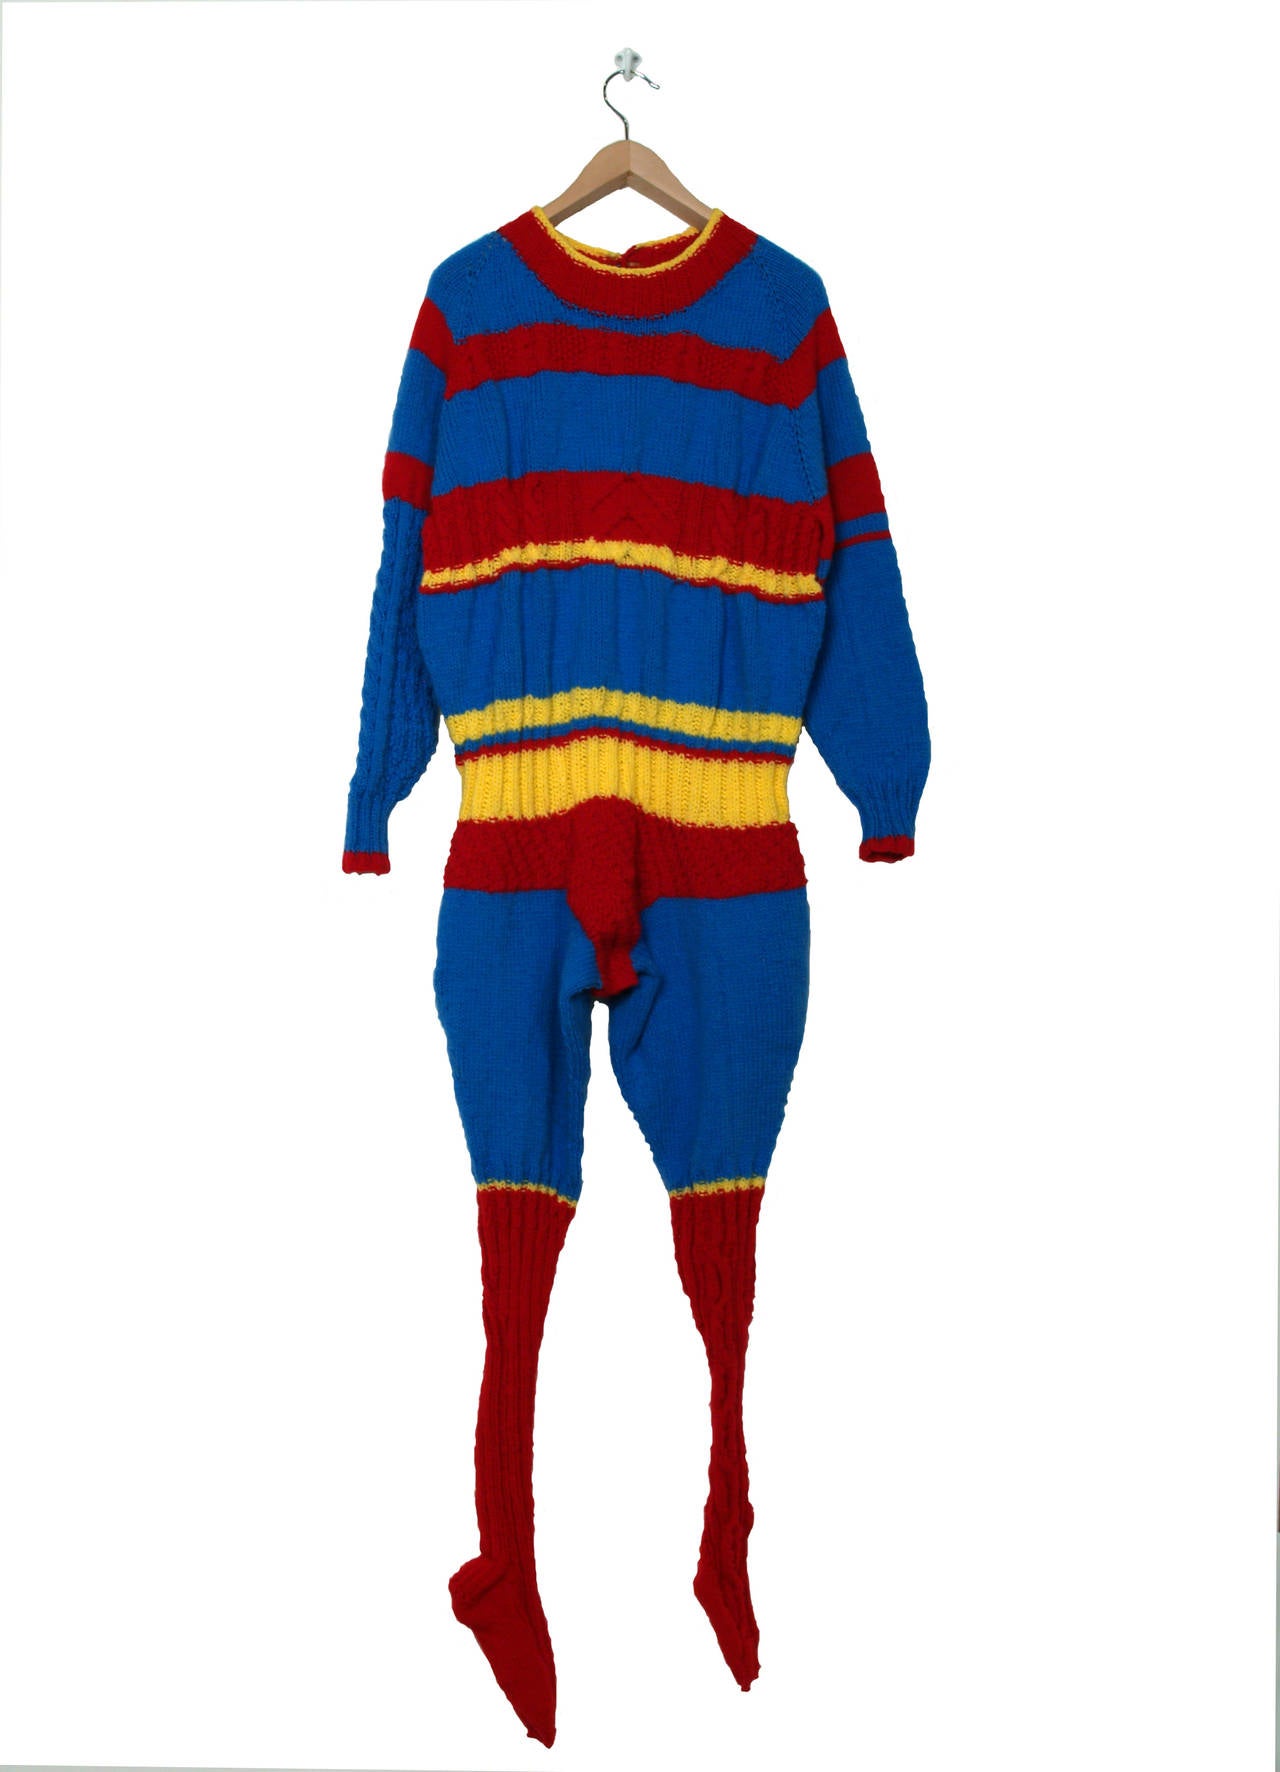 Channeling memories of both his mother and grandmother making sweaters to keep their children safe and warm, he relates the act of knitting as a heroic gesture. Further inspired by the heroes, toys, and action figures of his youth, Newport